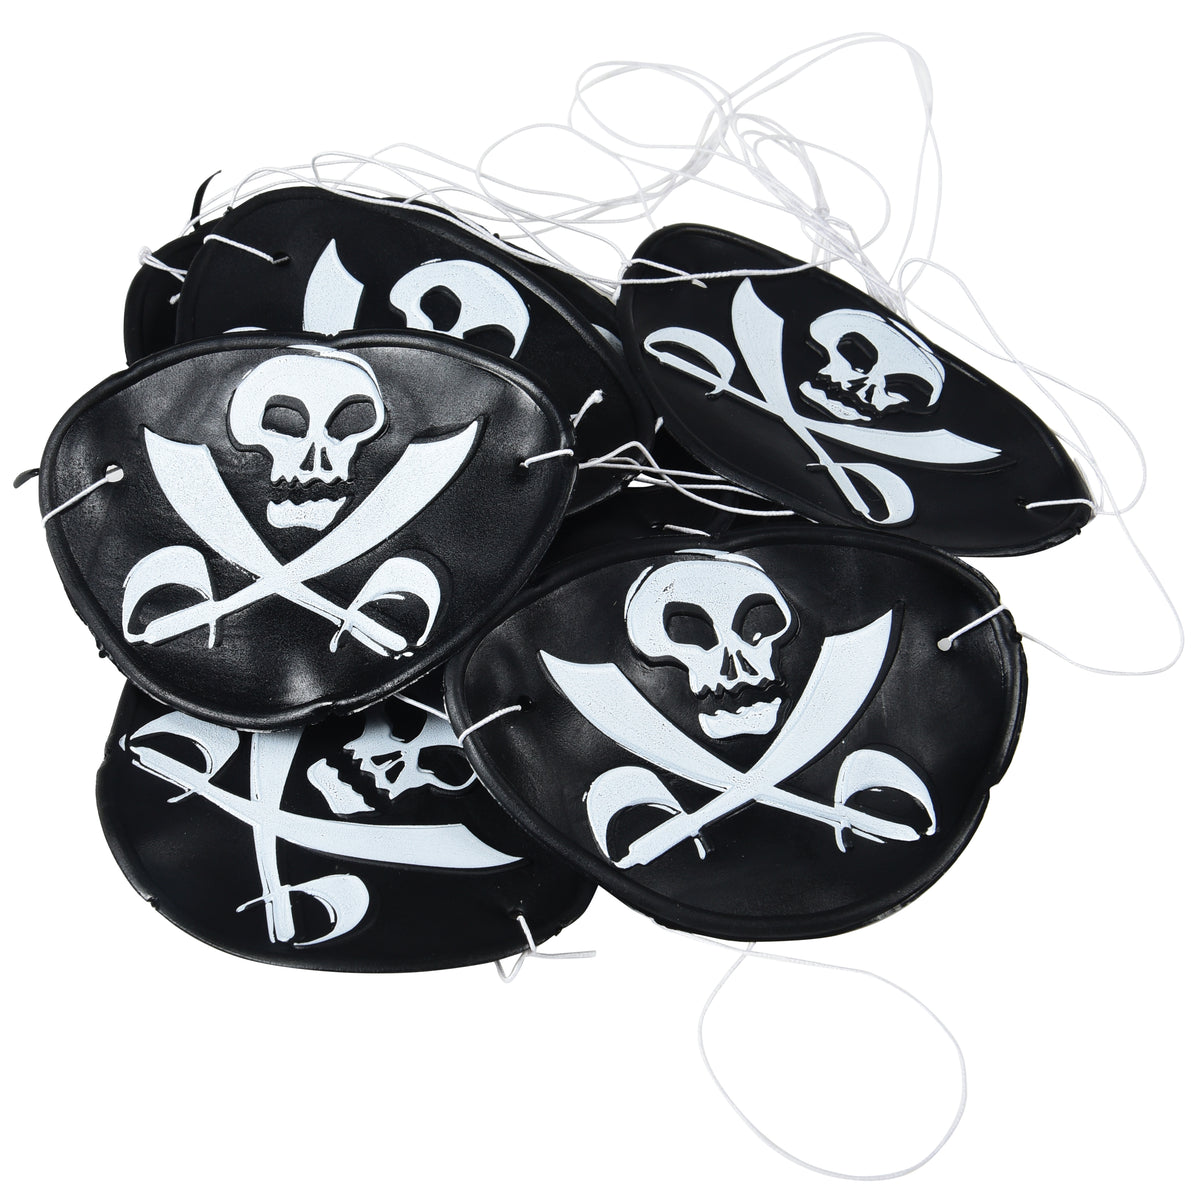 com-four® Pirate hats with skull and cowboy hats, headpiece for carnival,  fancy dress, Halloween, theme parties and more in different designs. –  TopToy